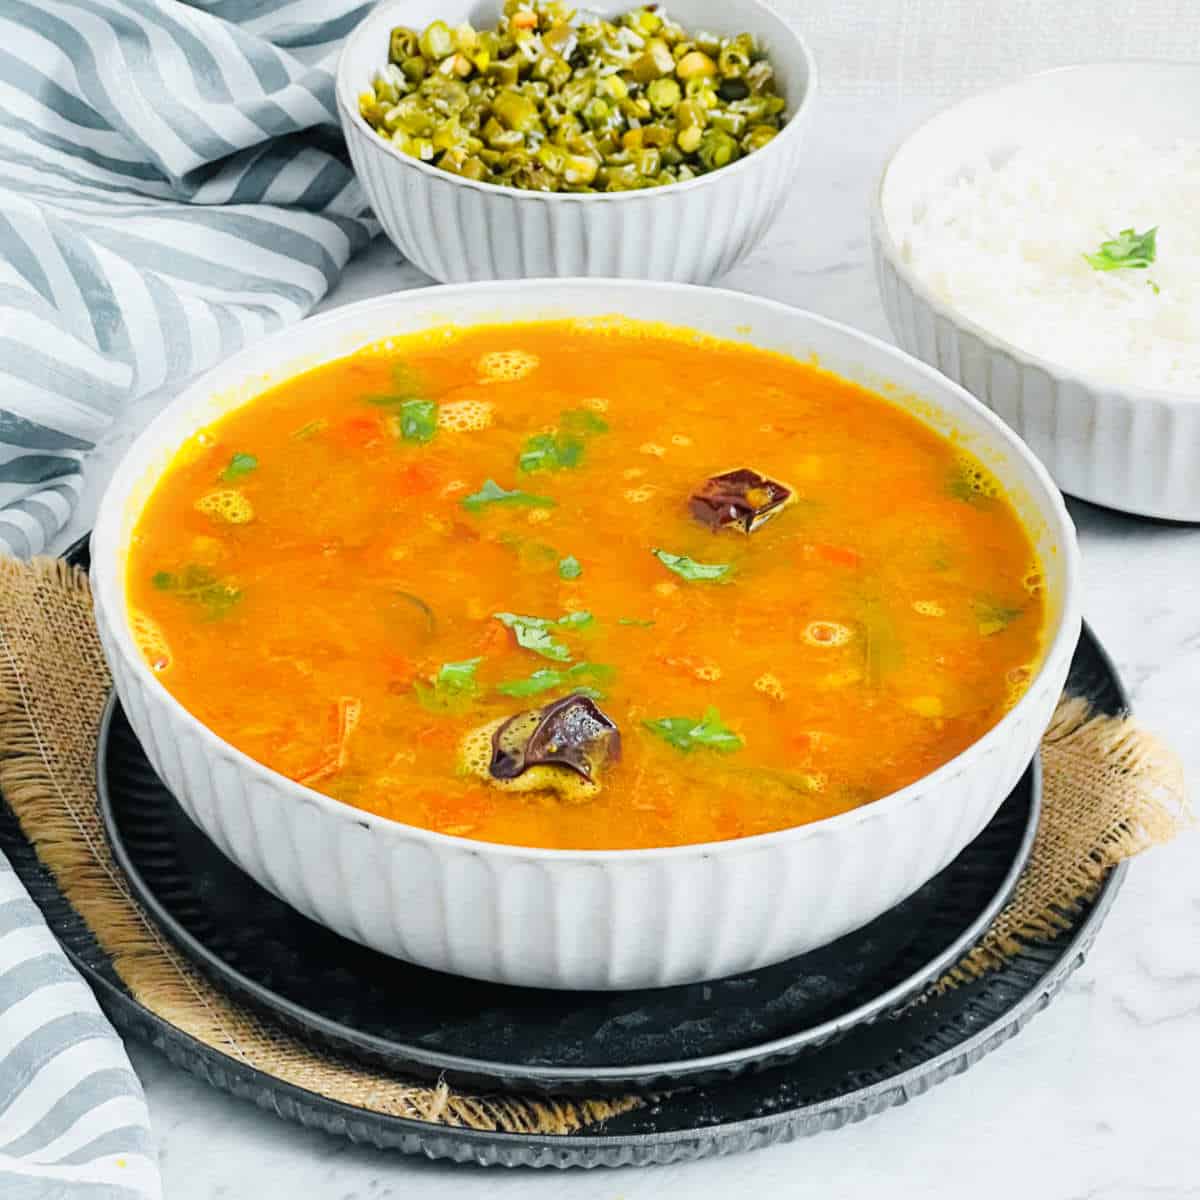 Mysore rasam served with rice and beans poriyal.